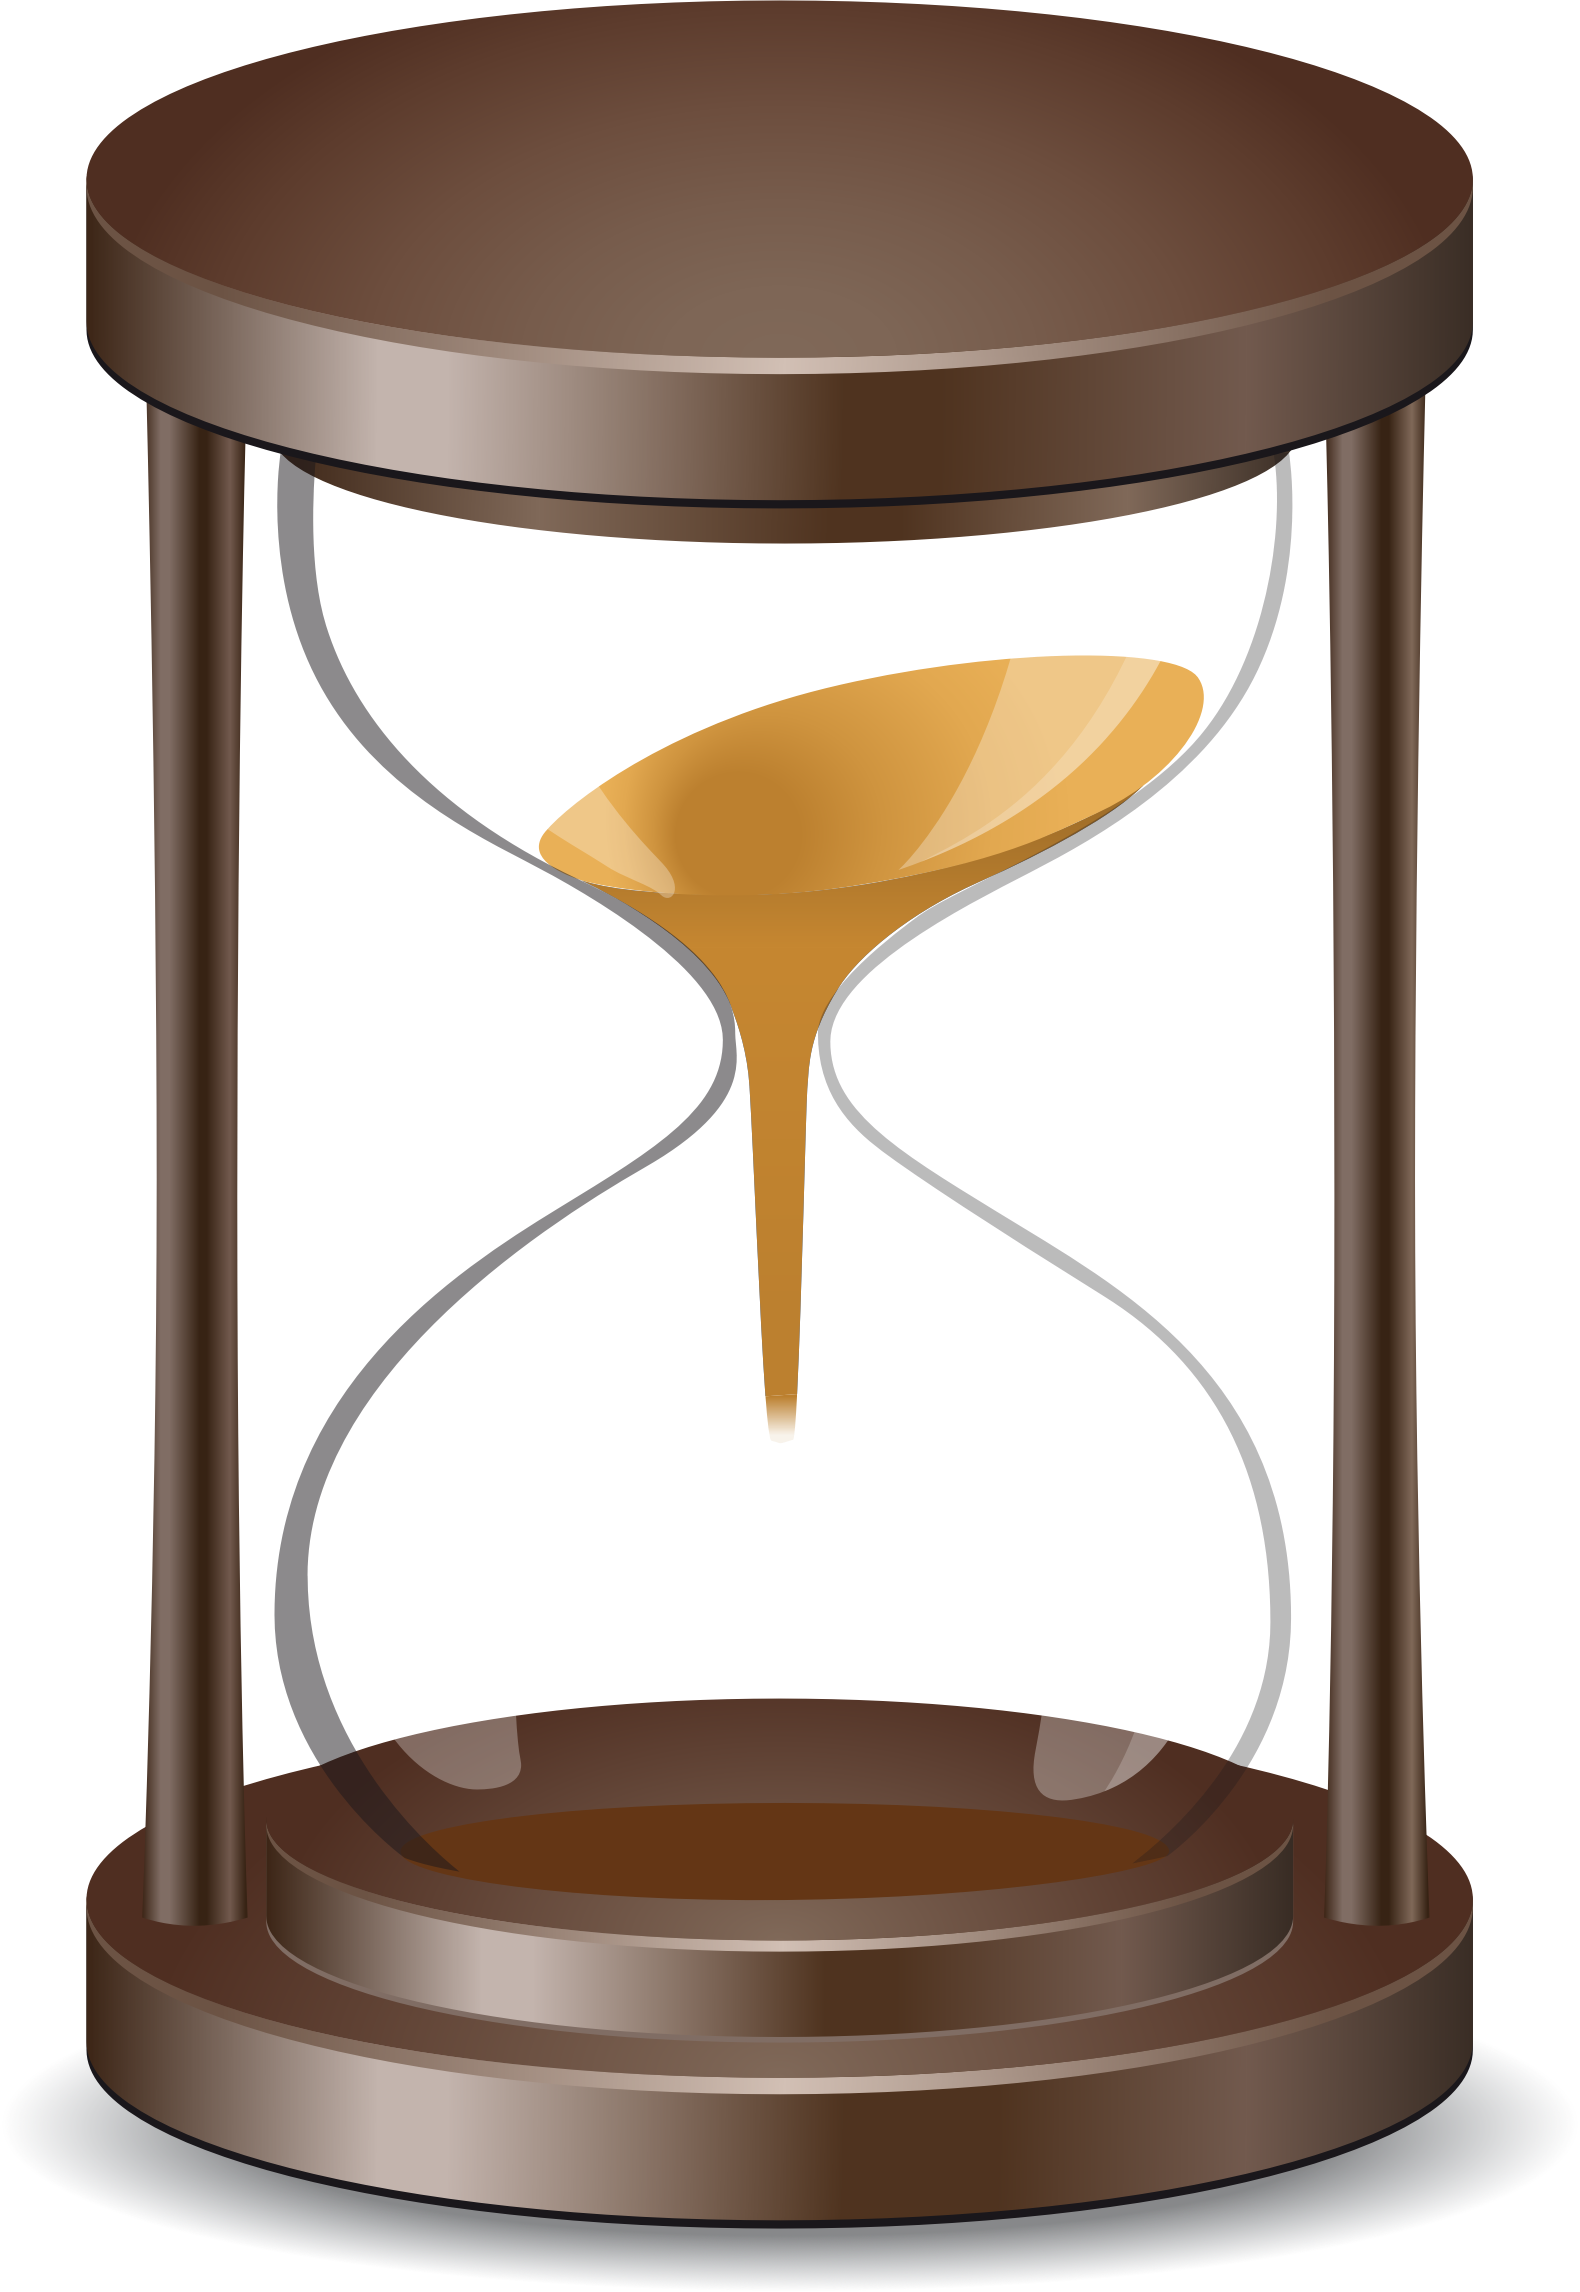 Download PNG image - Sandglass Animated Hourglass Transparent Background 